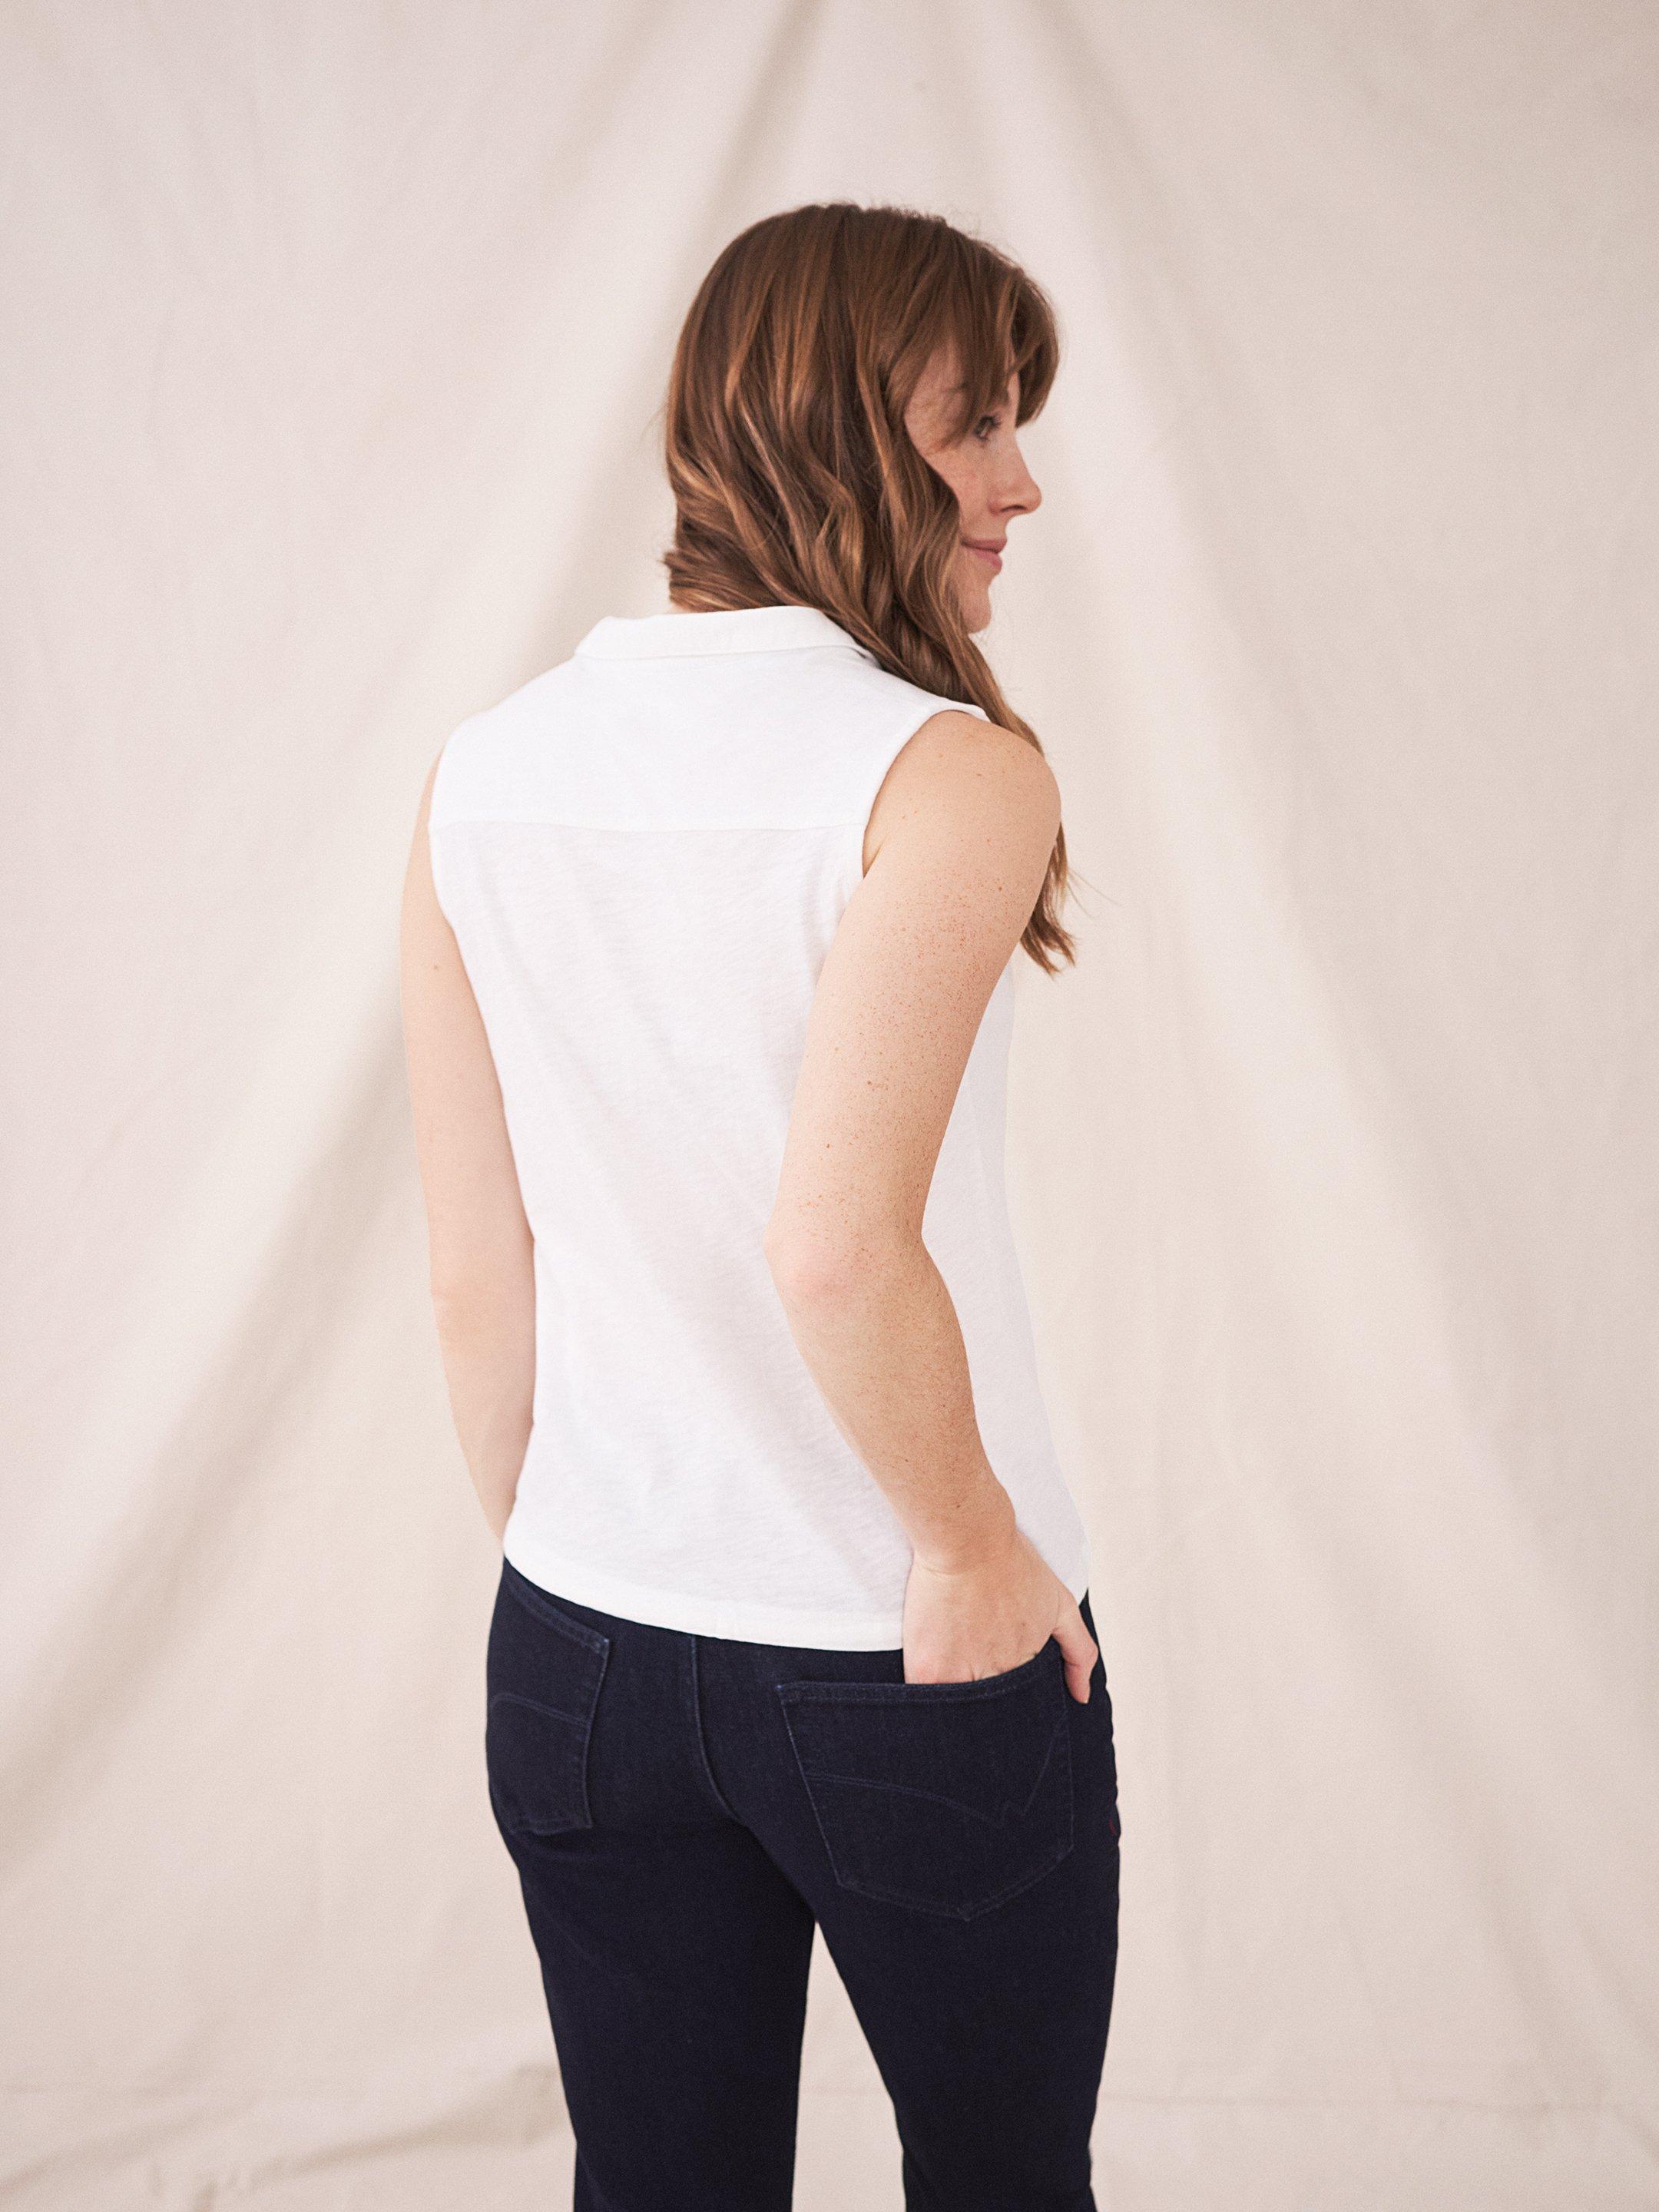 Flowing Grasses Shirt in BRIL WHITE - MODEL BACK